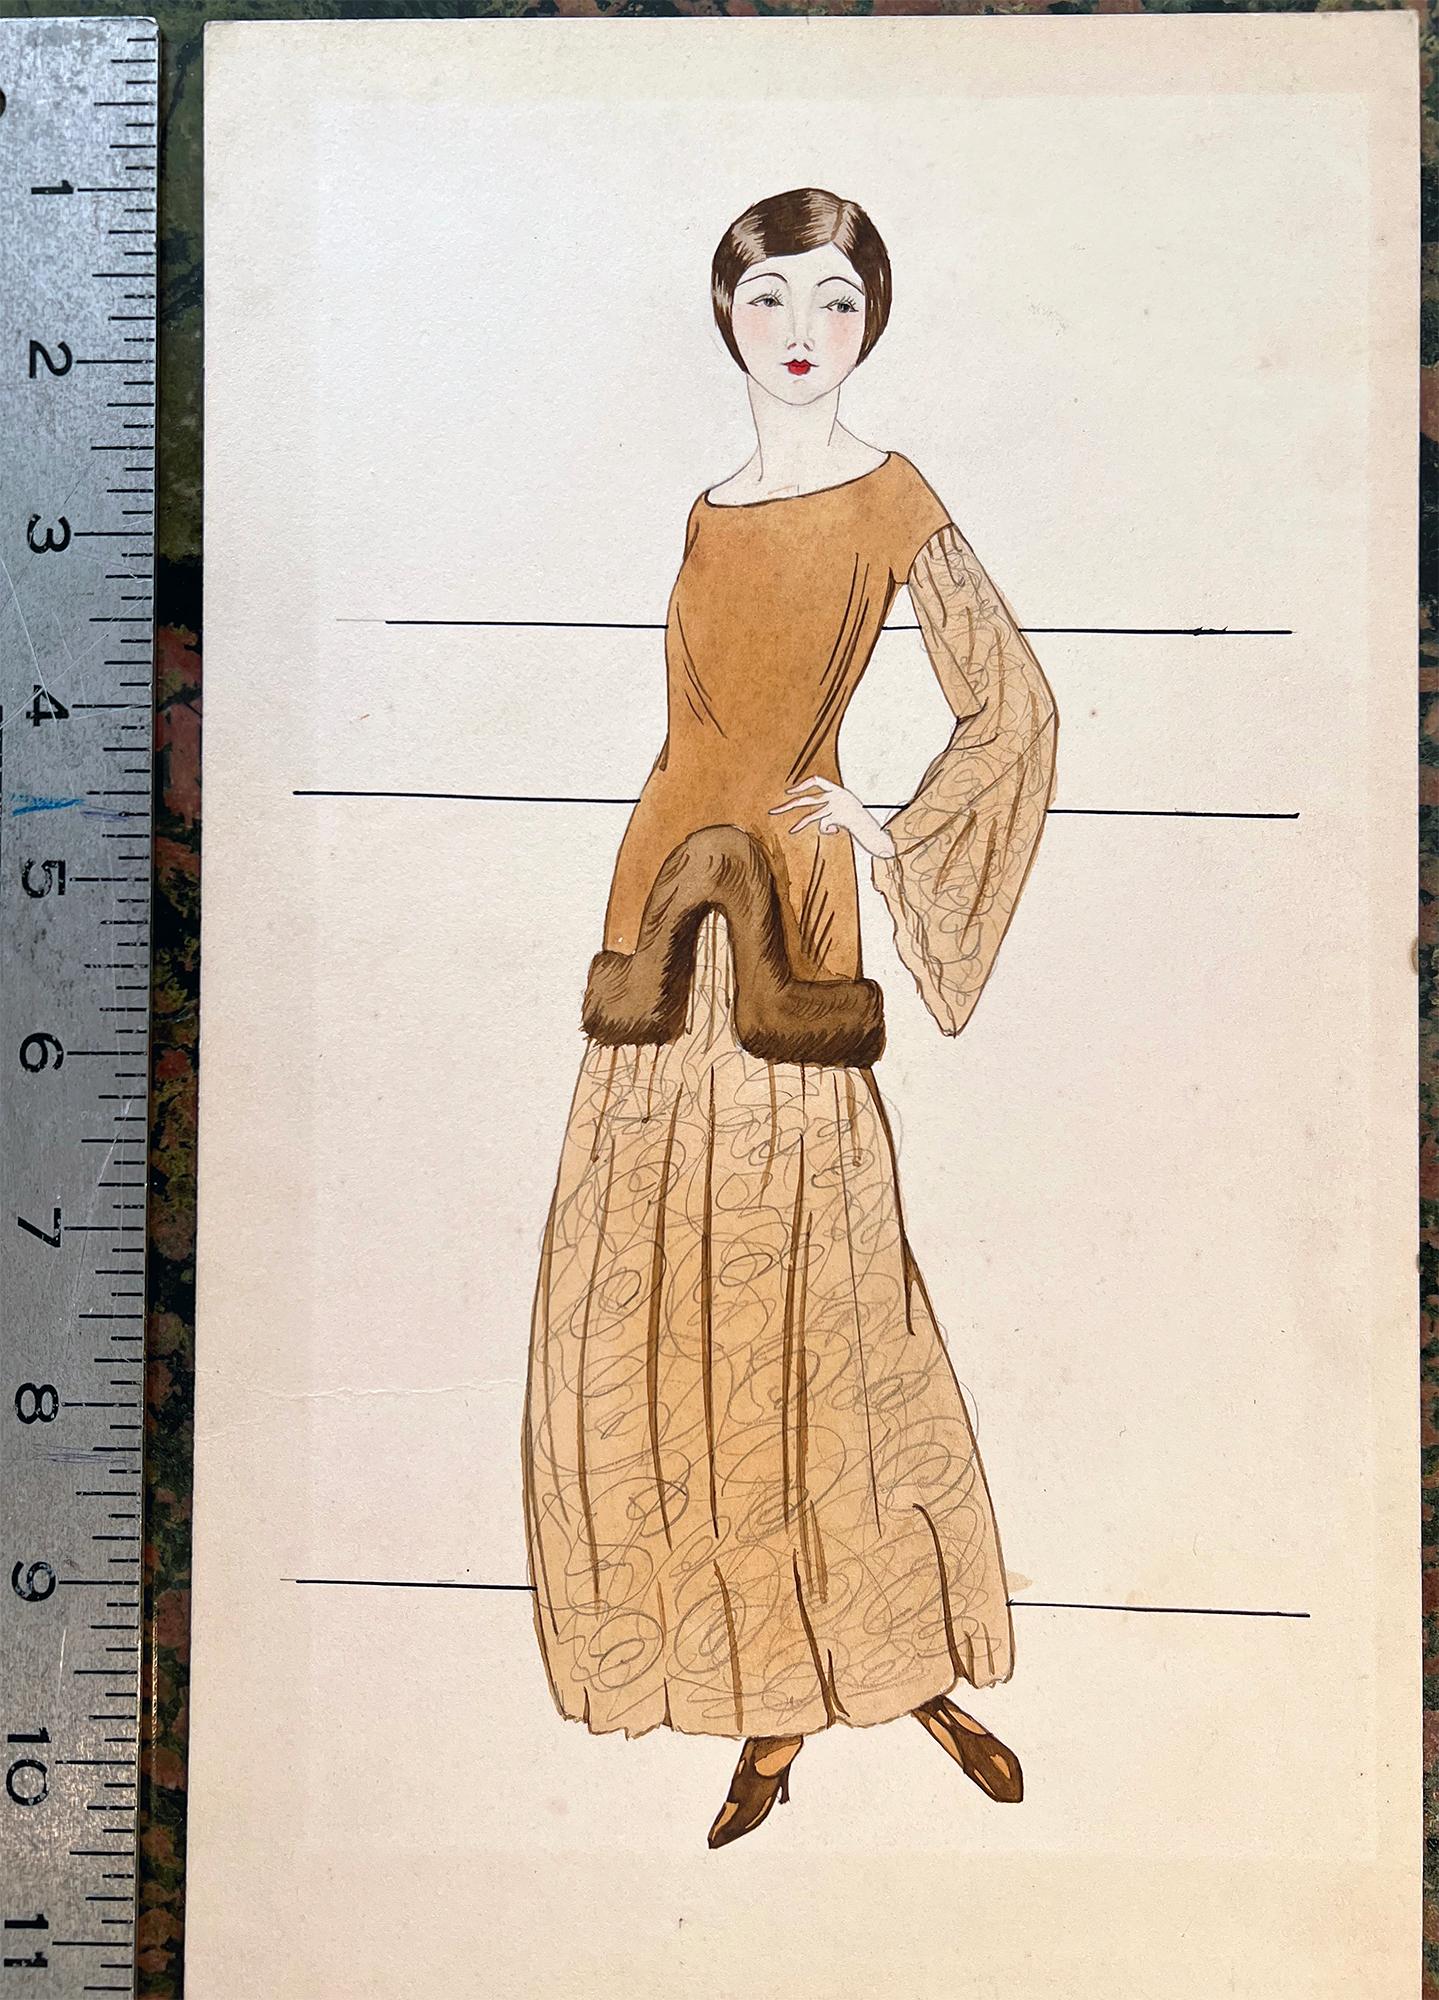 Original Vintage 1920's Ink and Watercolor Fashion Illustration by listed New England artist Harriette (Nutting) Cooper (1901 - 2002). 
The illustration depicts a lovely young flapper woman with a 1920s-accurate era straight bob hairstyle, high